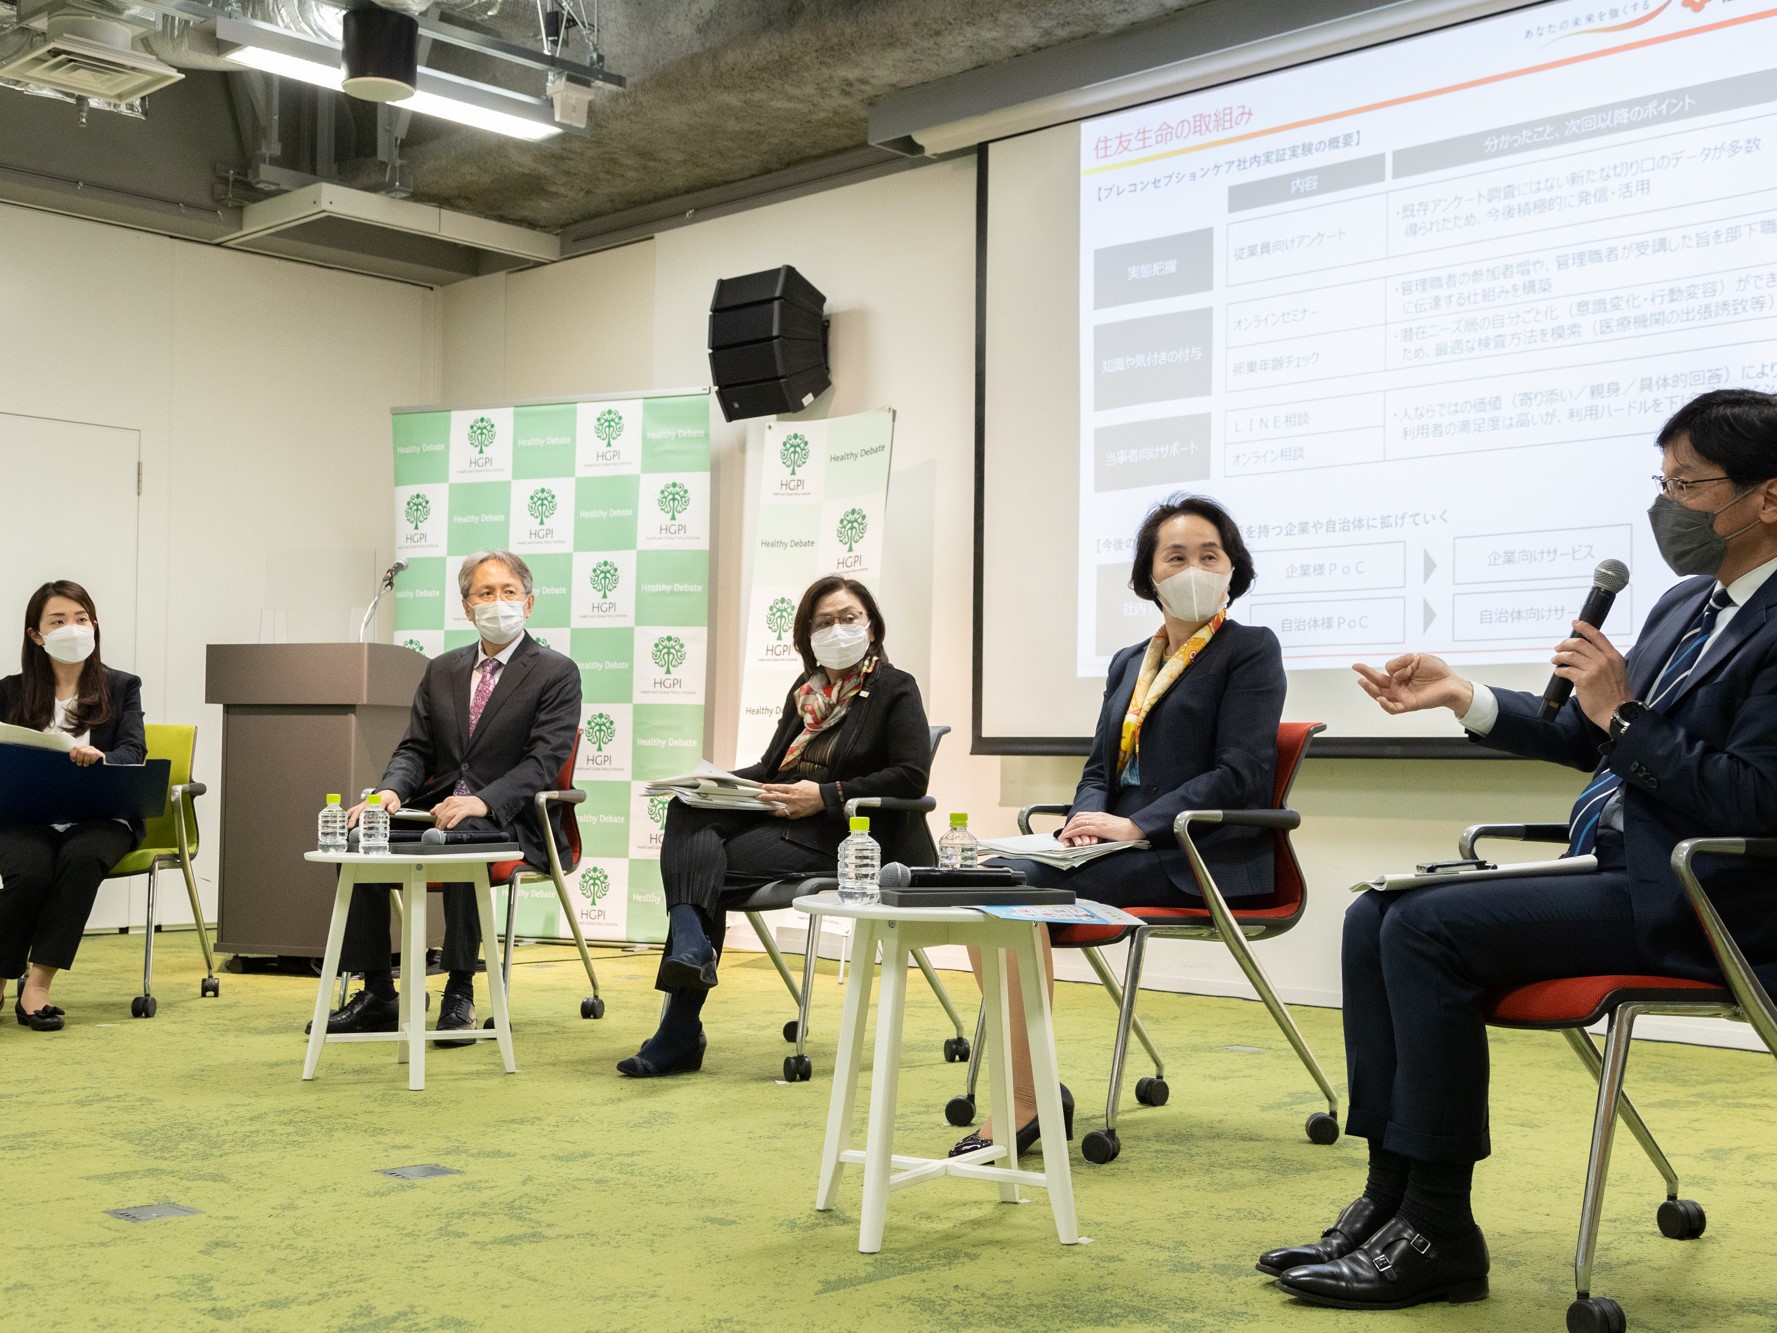 [Event Report] Women’s Health Project Symposium – “The Public Opinion Survey on Child-rearing in Modern Japan: Aiming to Build a Society in Which People Who Want to Get Pregnant Can Do So” (March 4, 2022)